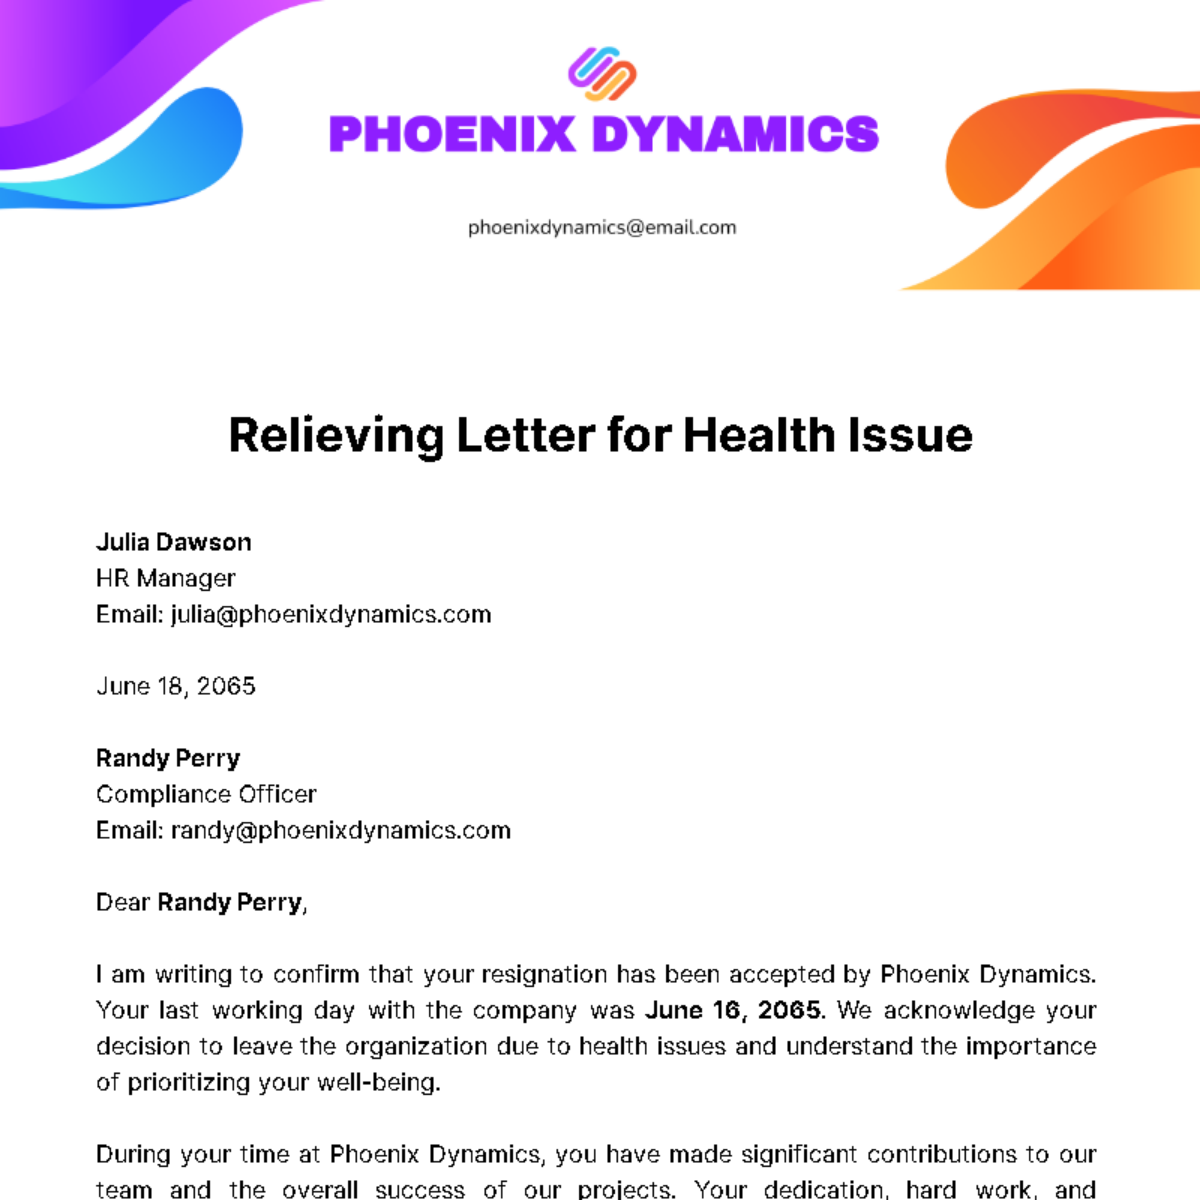 Relieving Letter for Health Issues Template